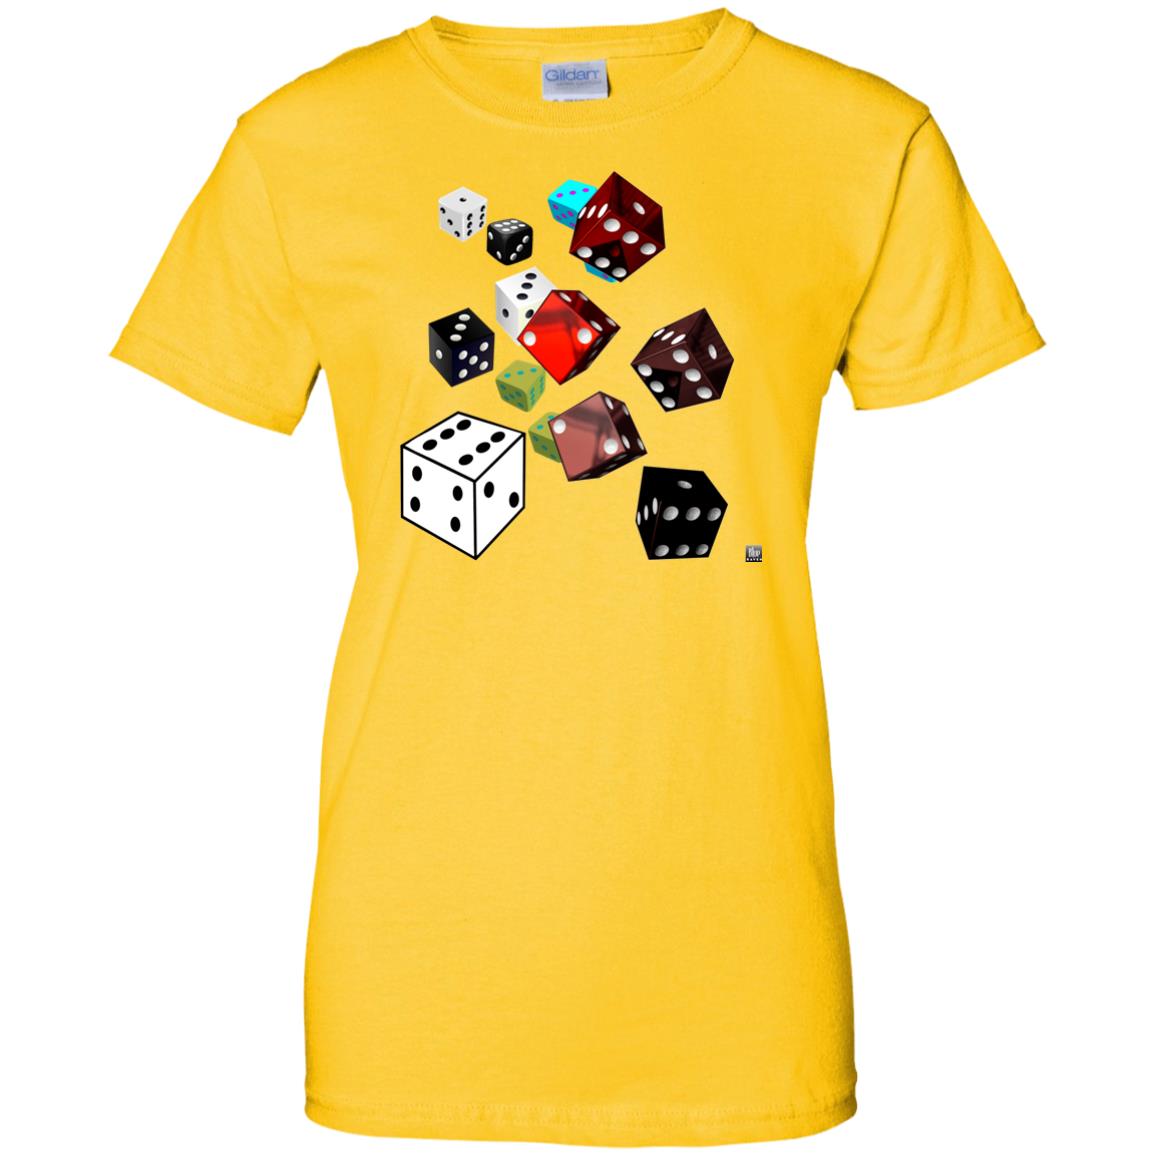 roll of the dice - Women's Relaxed Fit T-Shirt